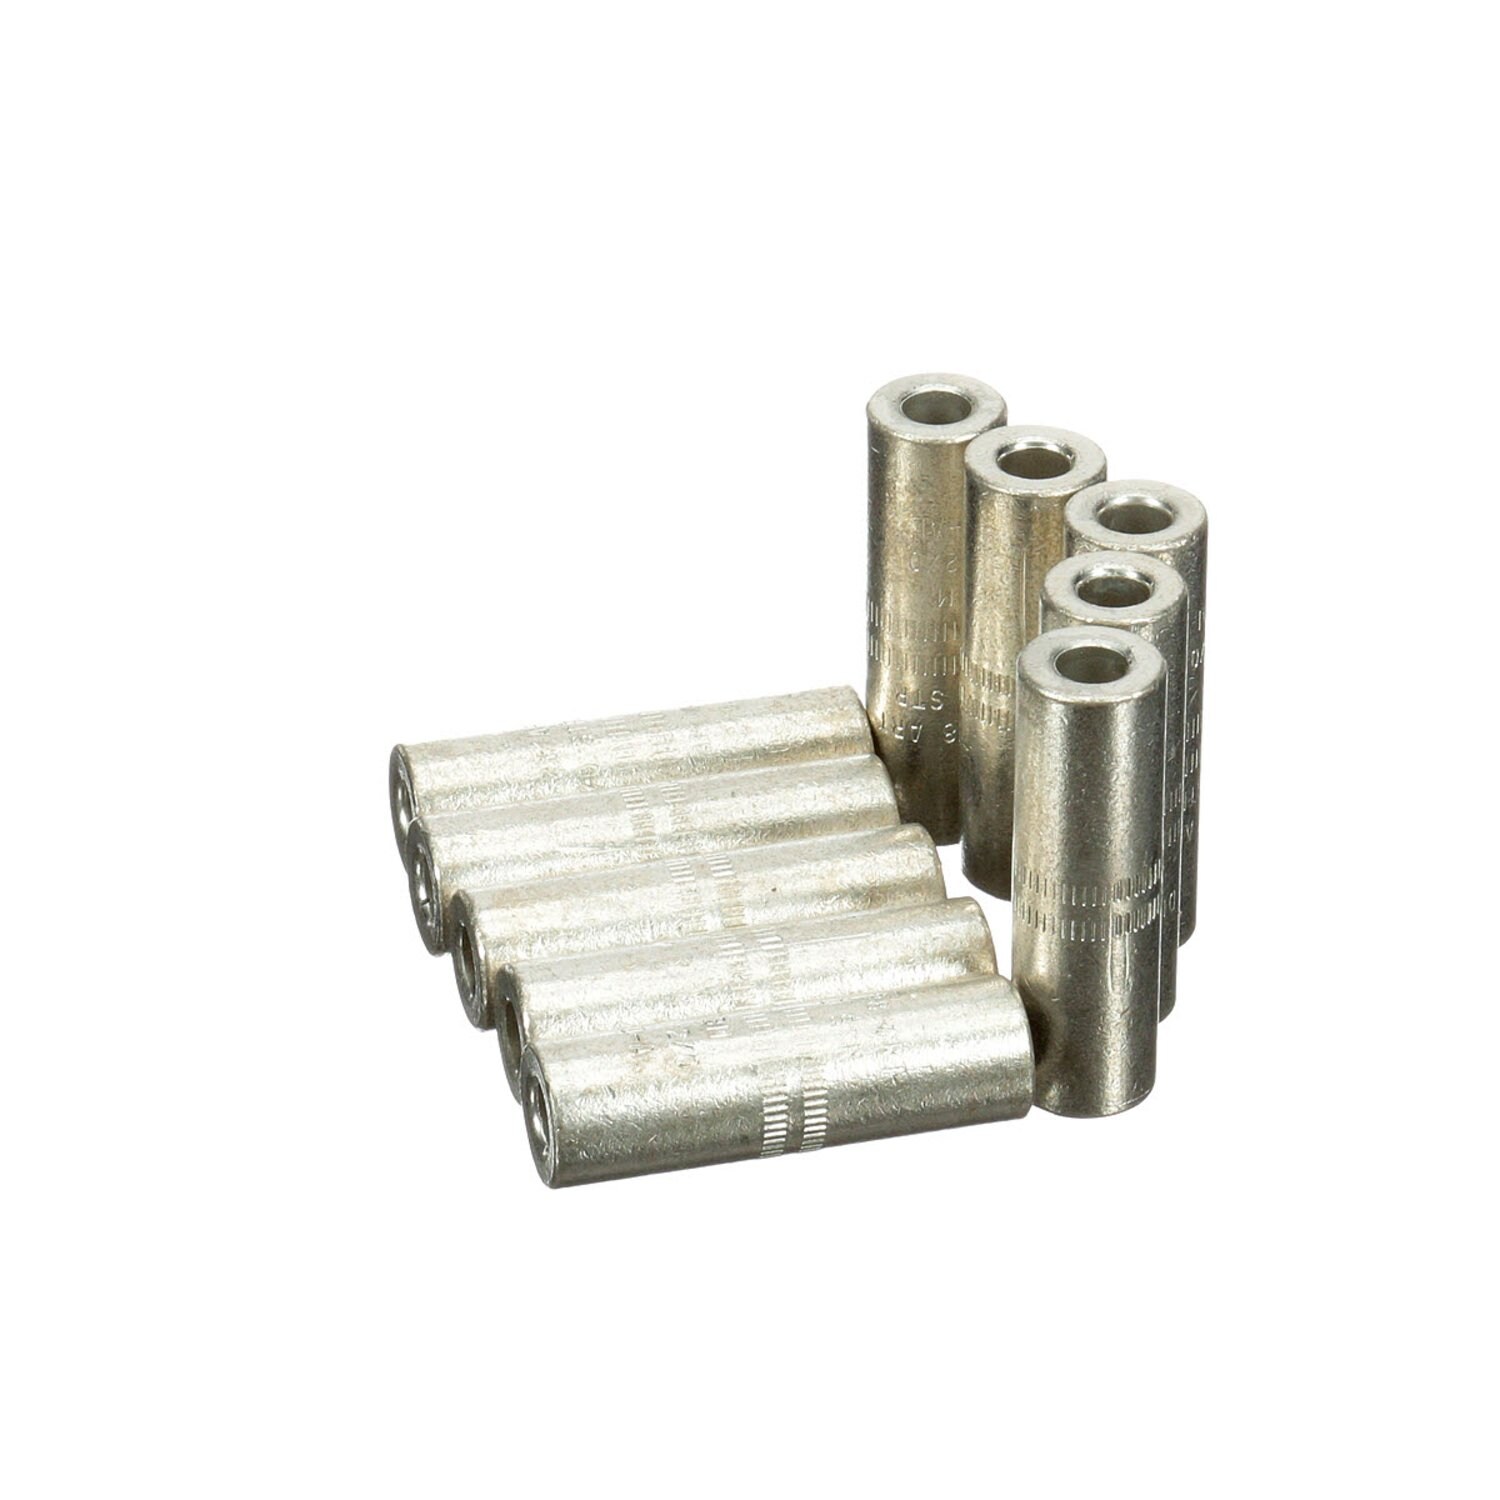 7000148833 - 3M Aluminum Connector CI-21-840, up to 35 kV, 2-1 AWG, 1-1/0 AWG solid,
Connector O.D. 0.910 in (23,1 mm), 10/Case